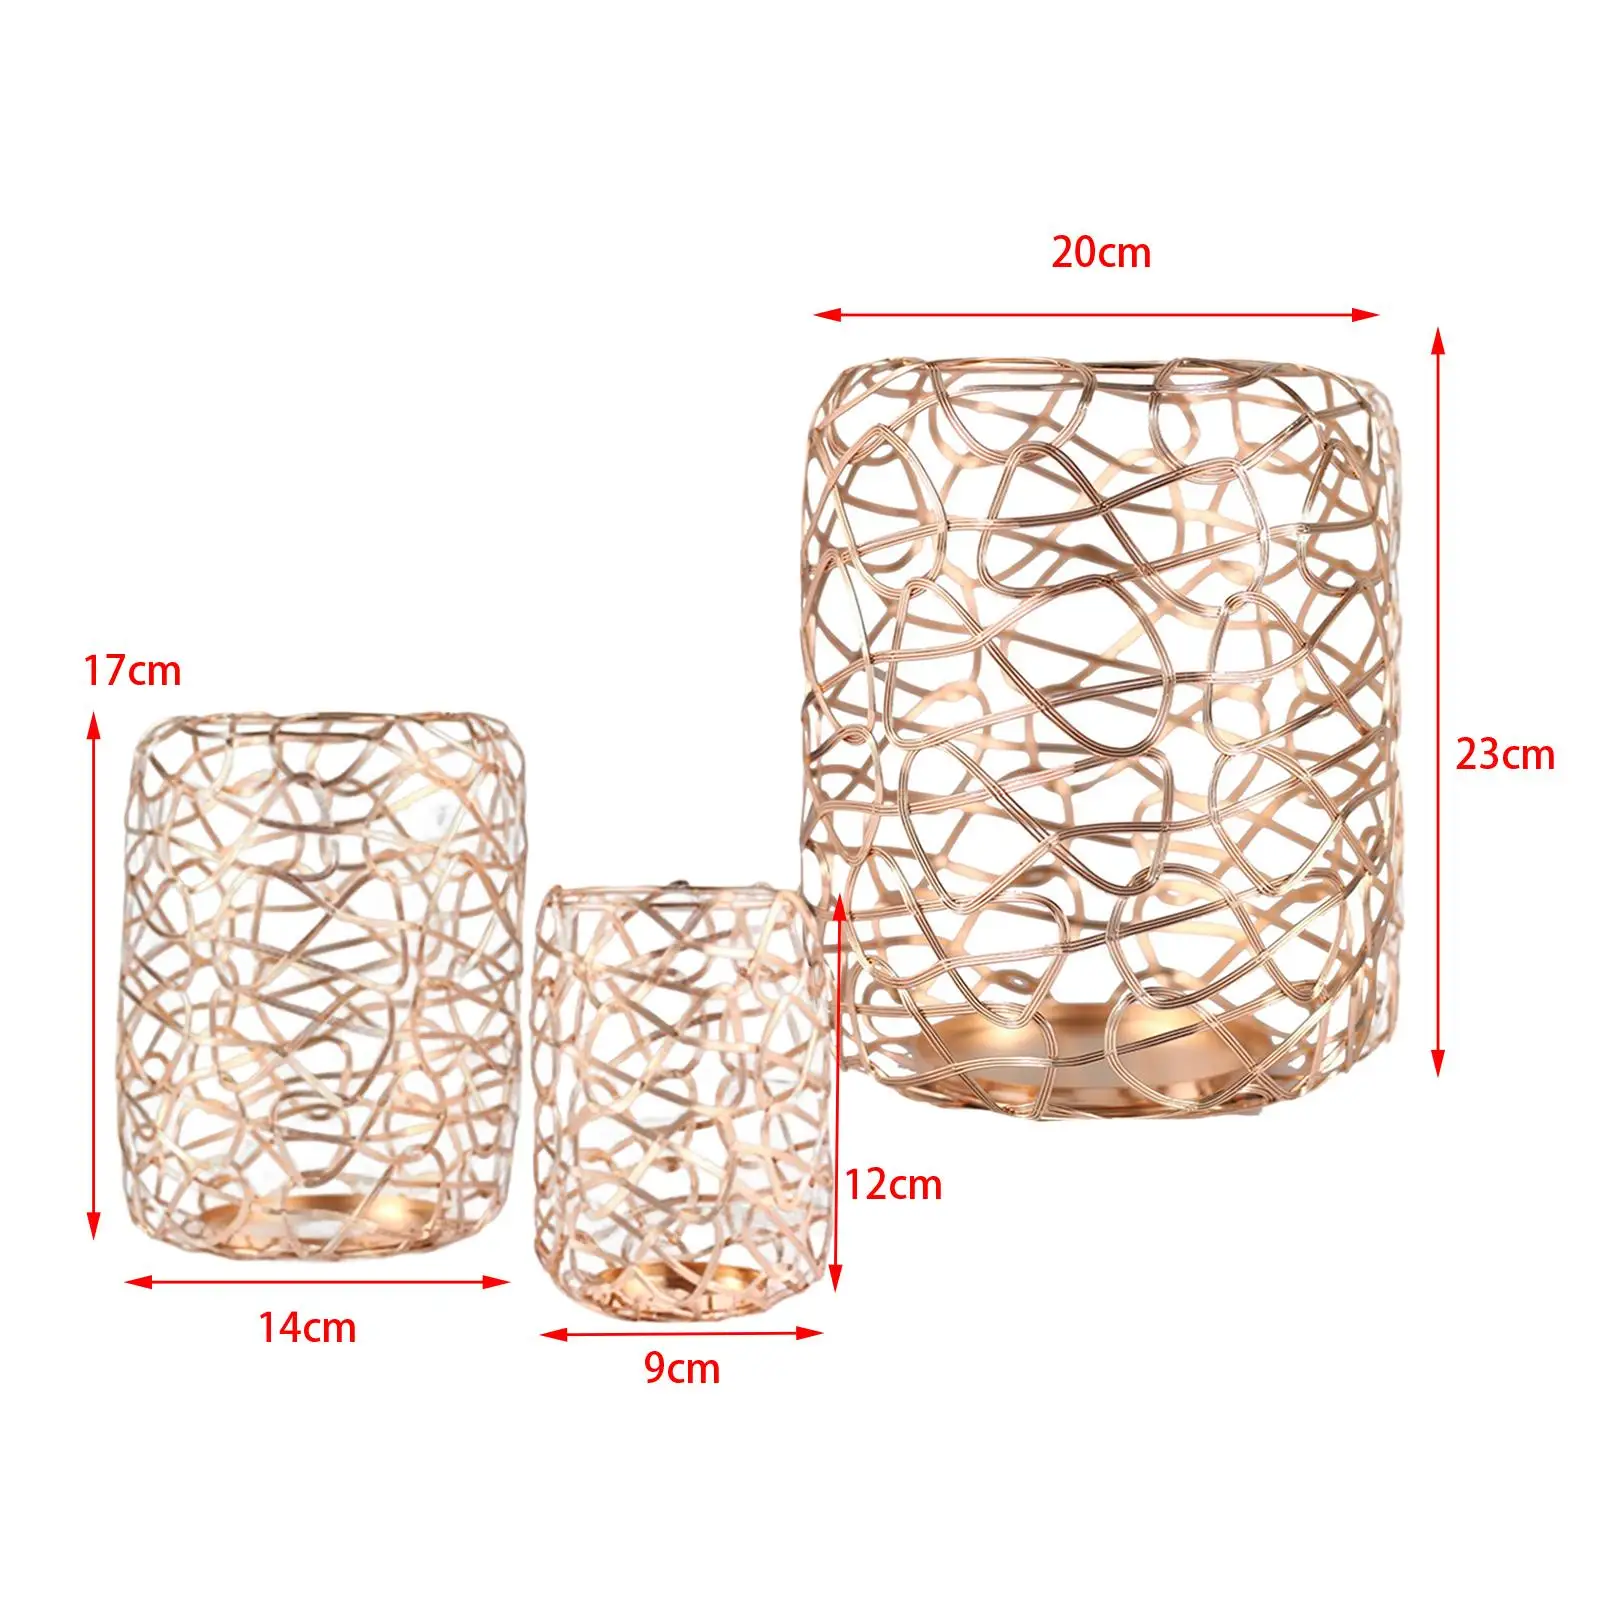 3Pcs Rustic Wire Candle Holder Candlestick Stand Tealight Candle Holders Ornament Crafts for Party Wedding Dinner Home Decor